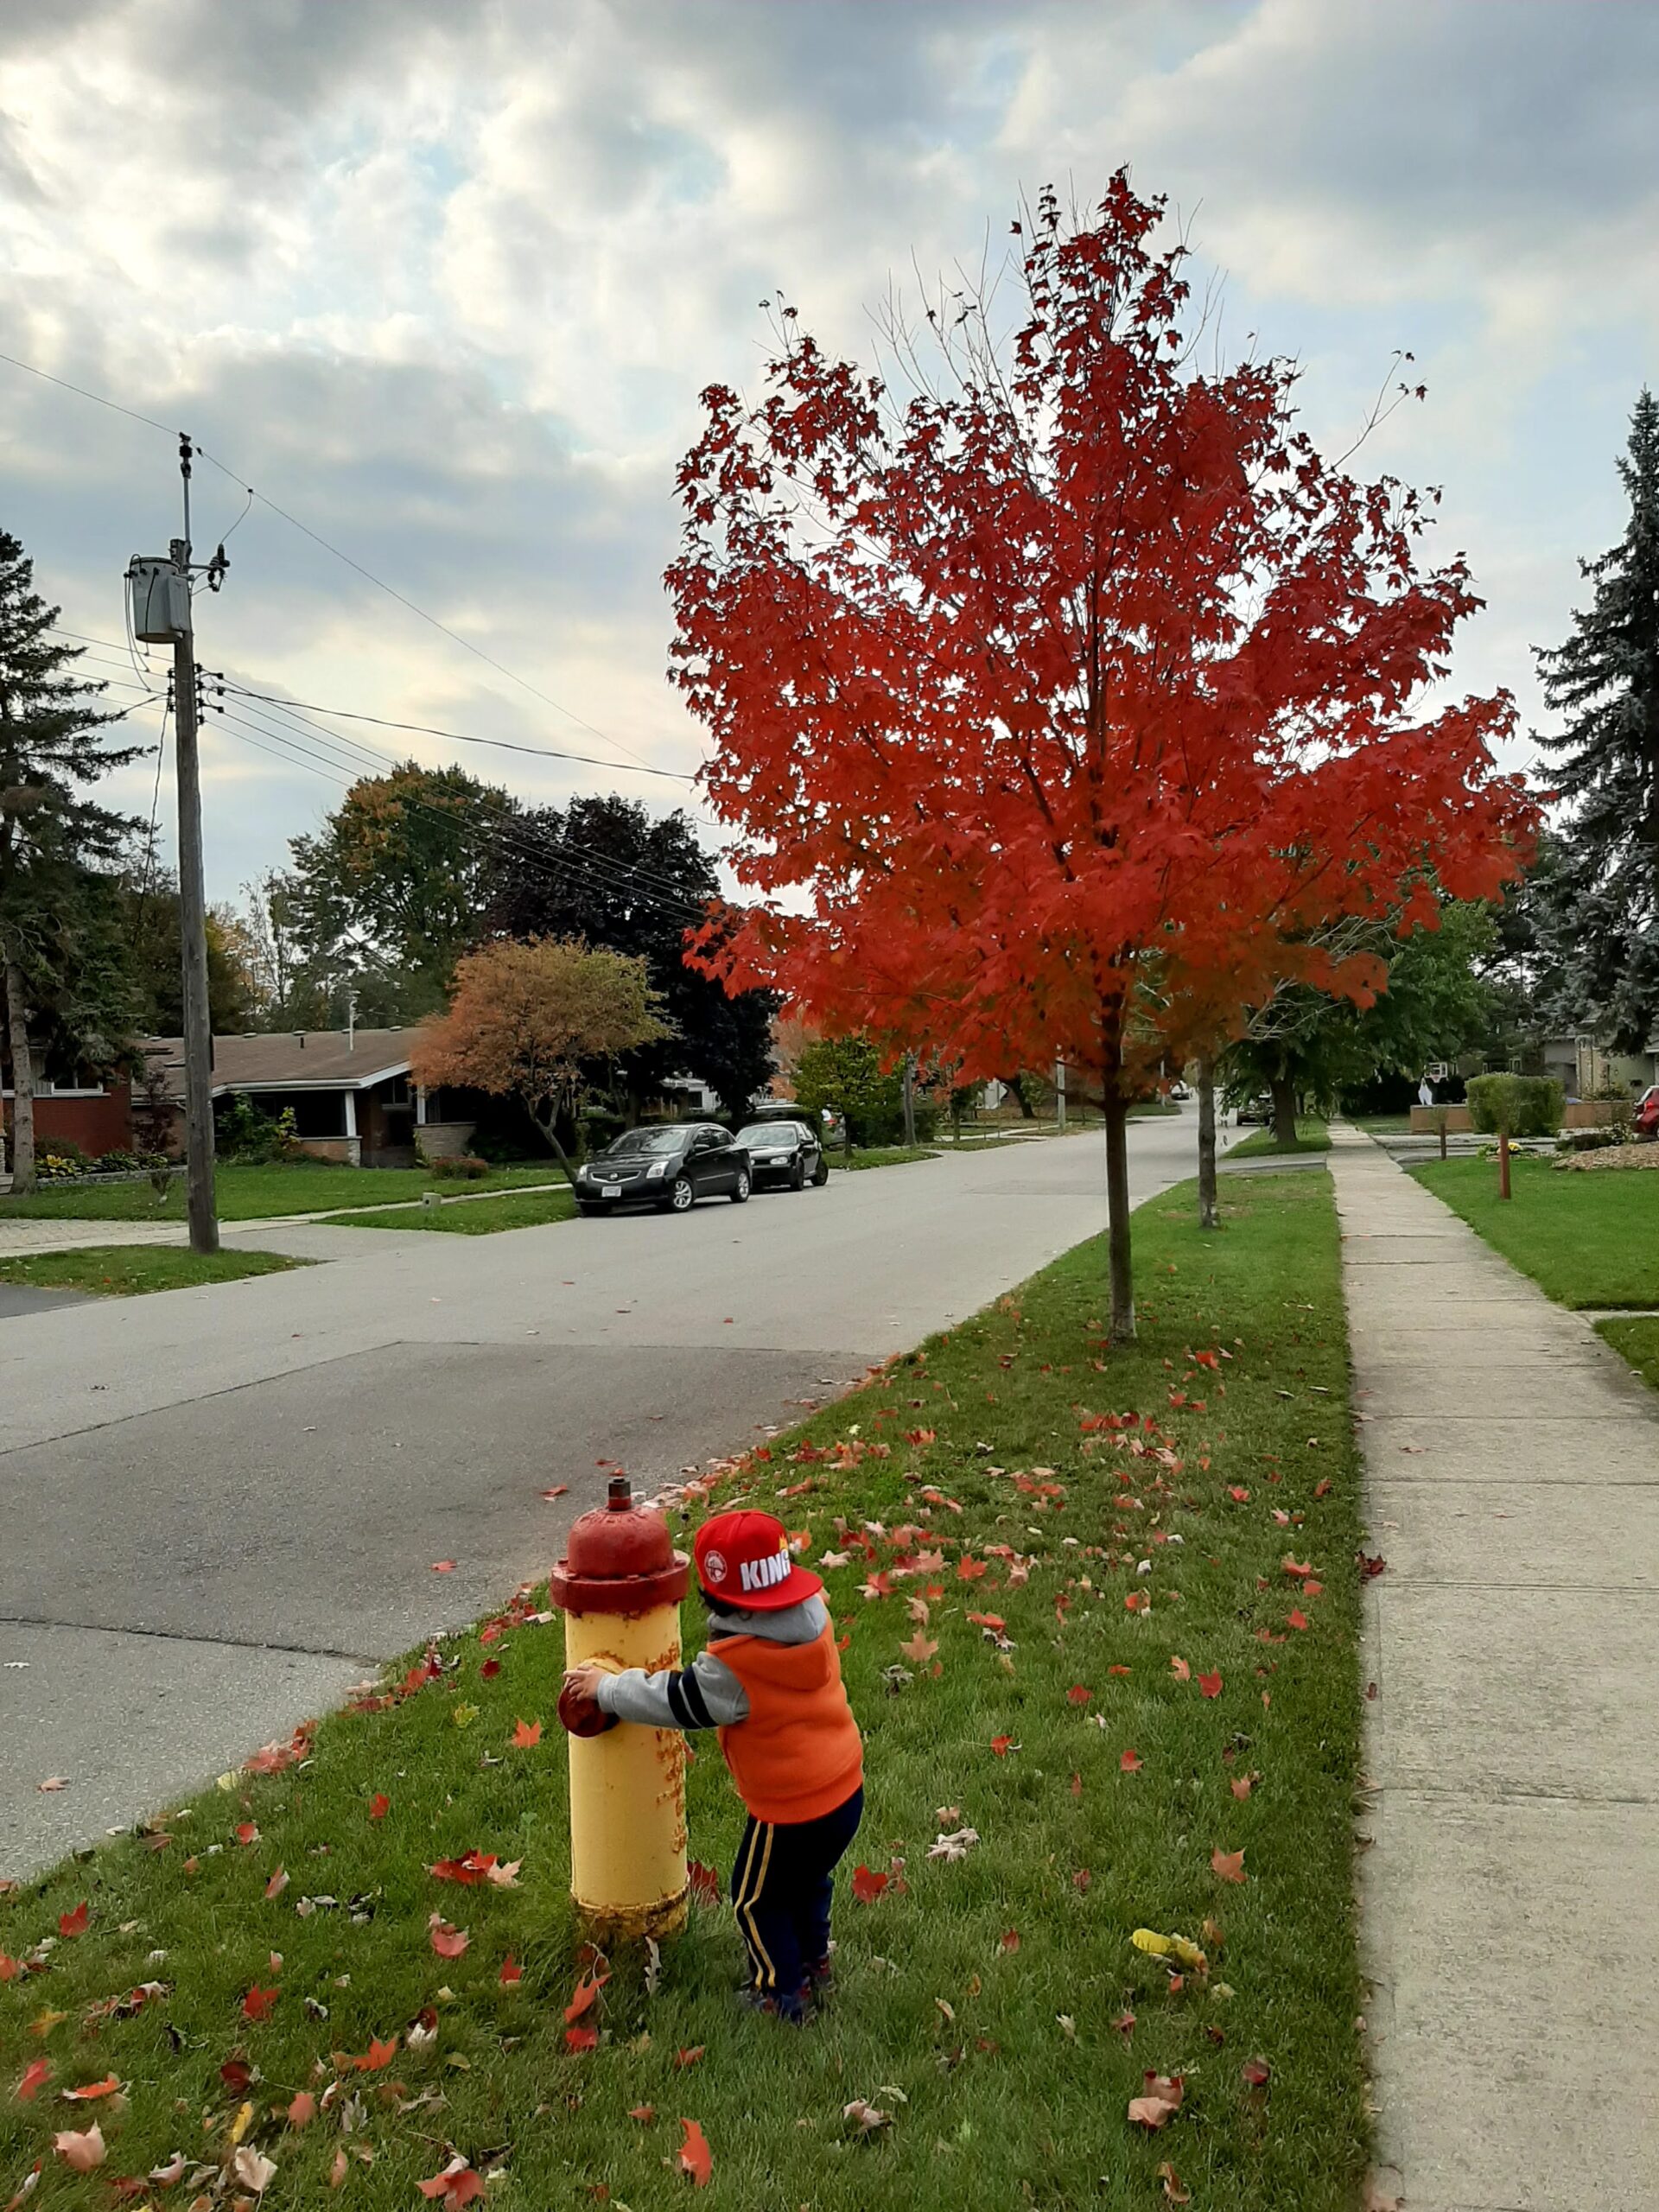 toddler playing on a fire hydrant next to a red tree